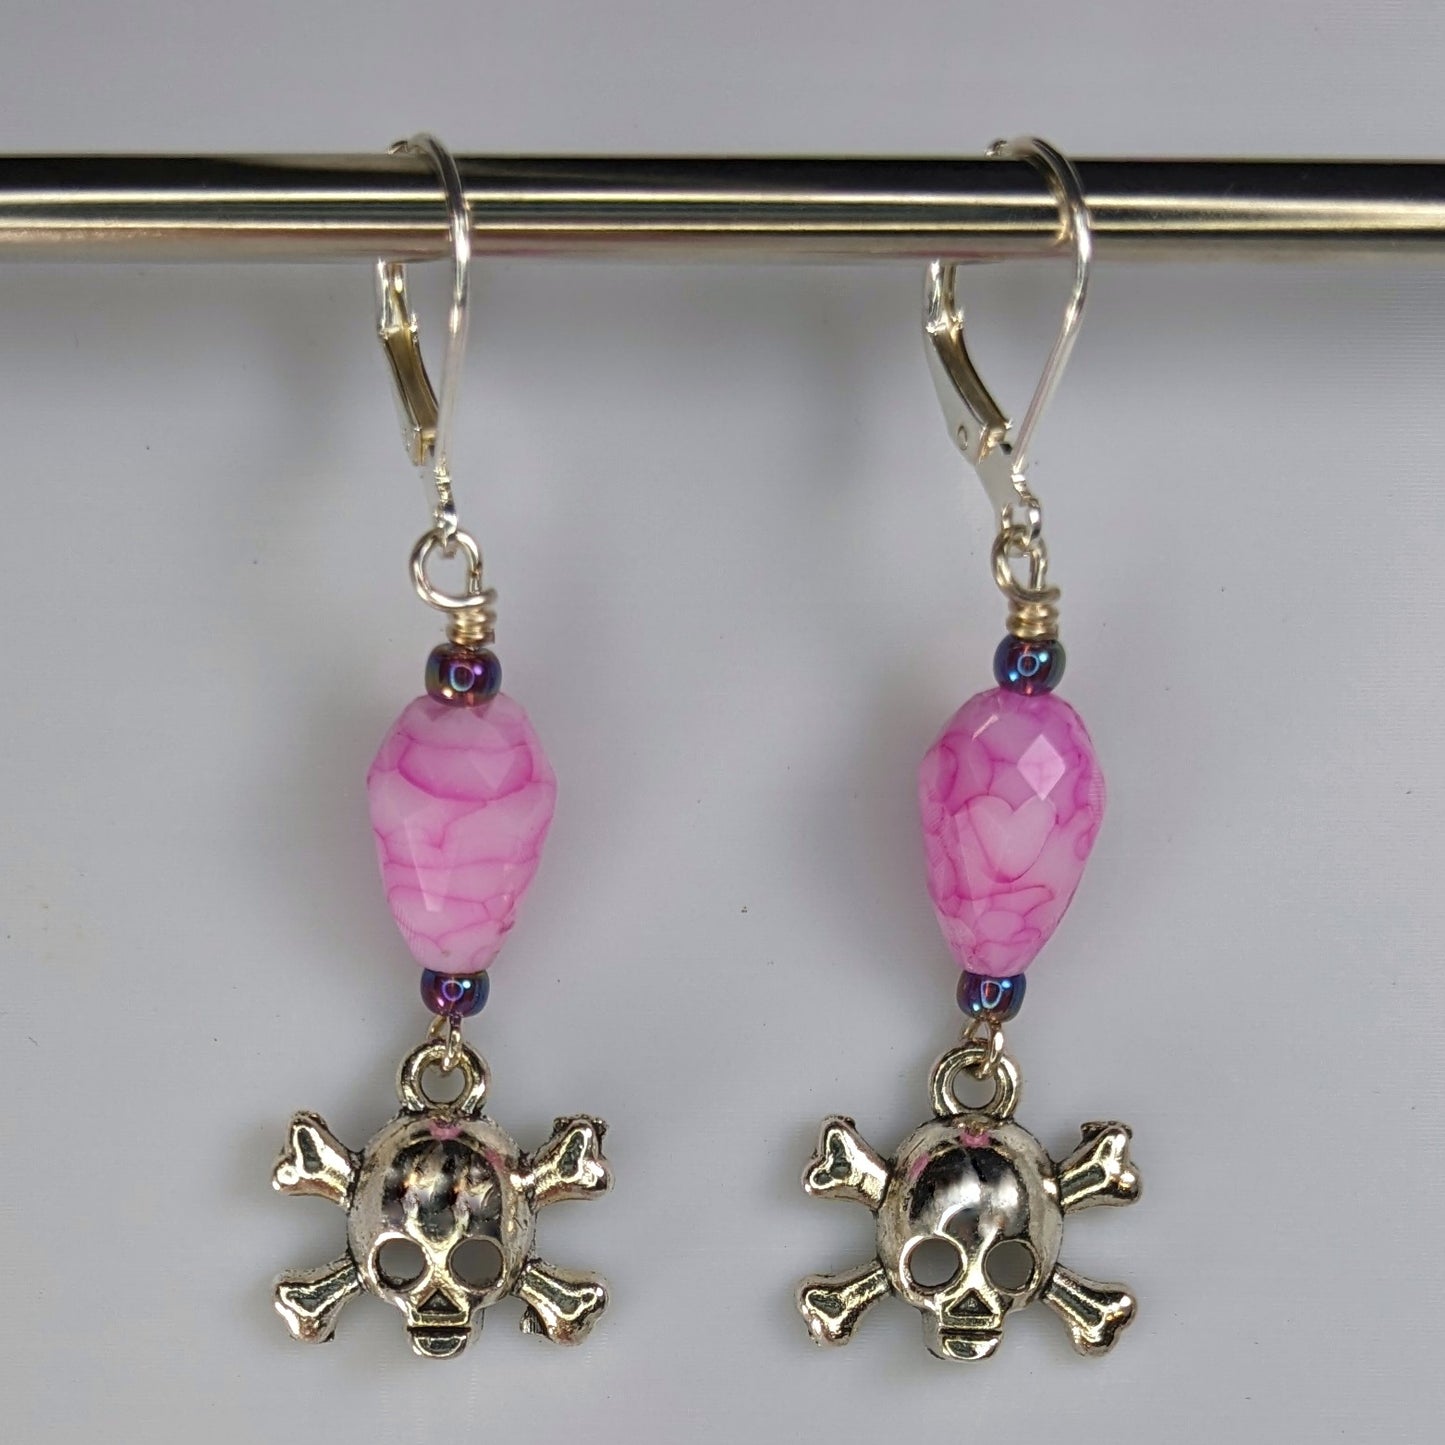 Skull and Crossbones Earrings & Stitch Markers